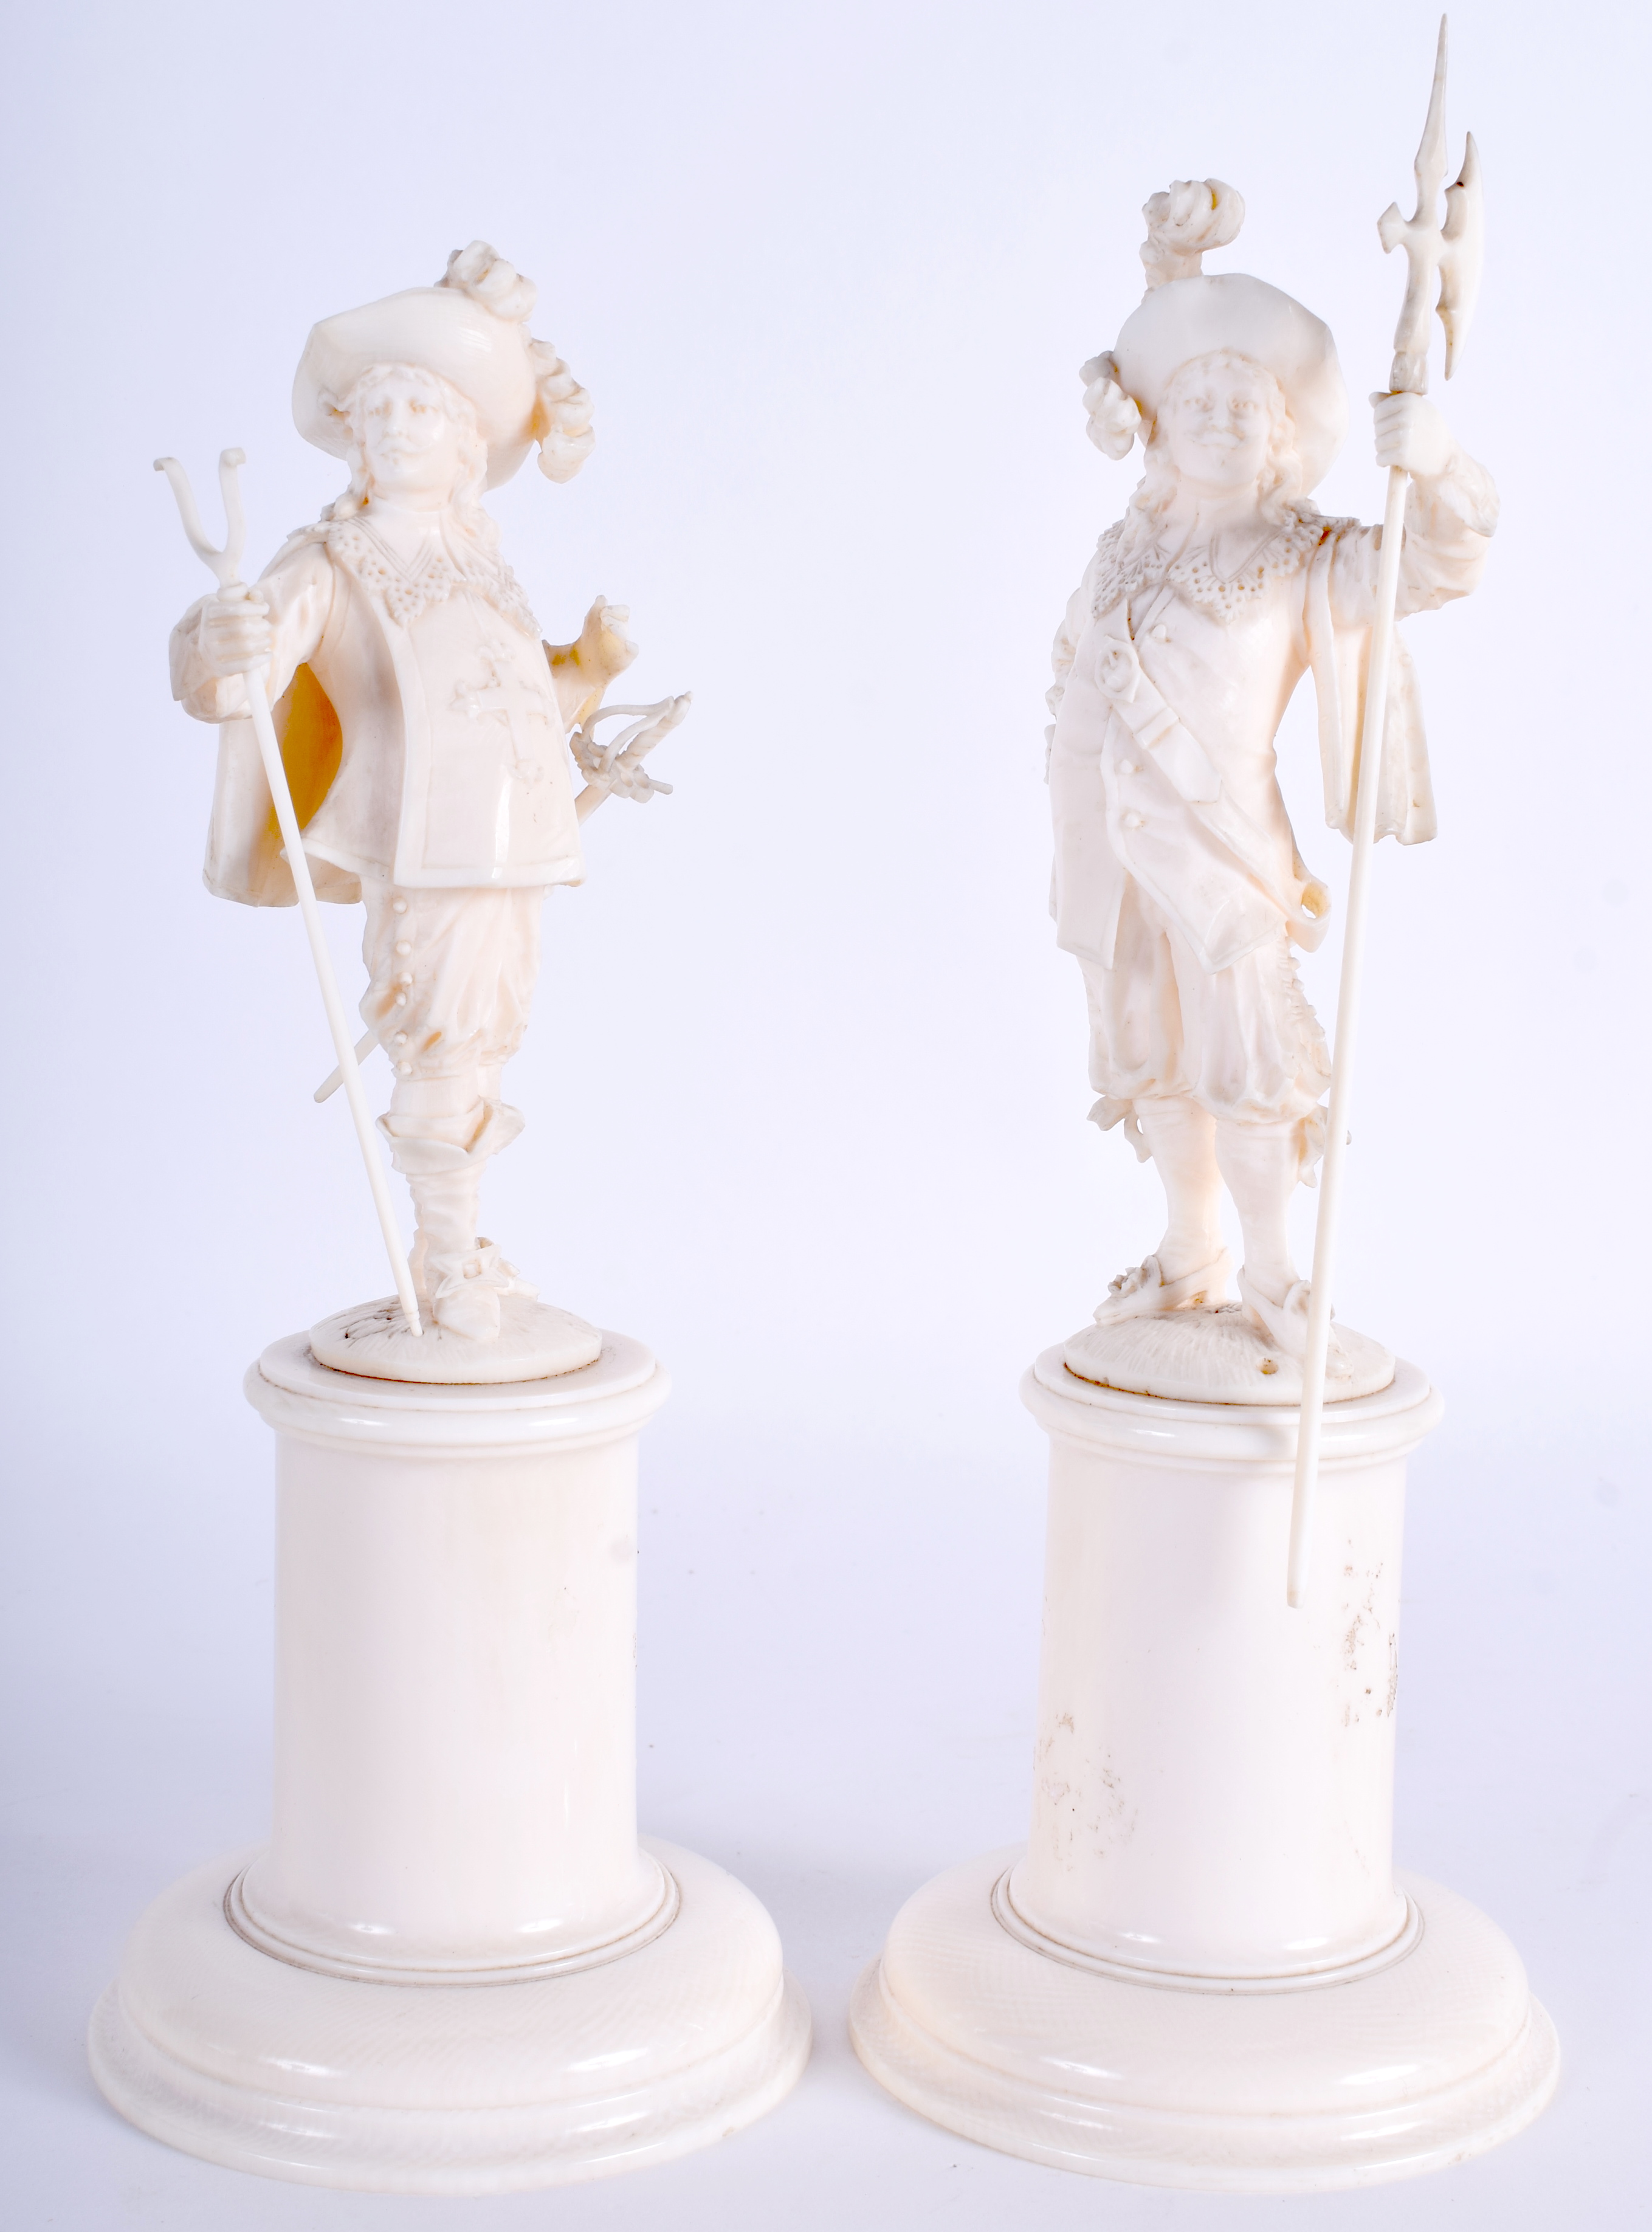 A PAIR OF 19TH CENTURY CONTINENTAL CARVED IVORY DIEPPE CAVALIERS modelled upon pedestals. 21 cm hig